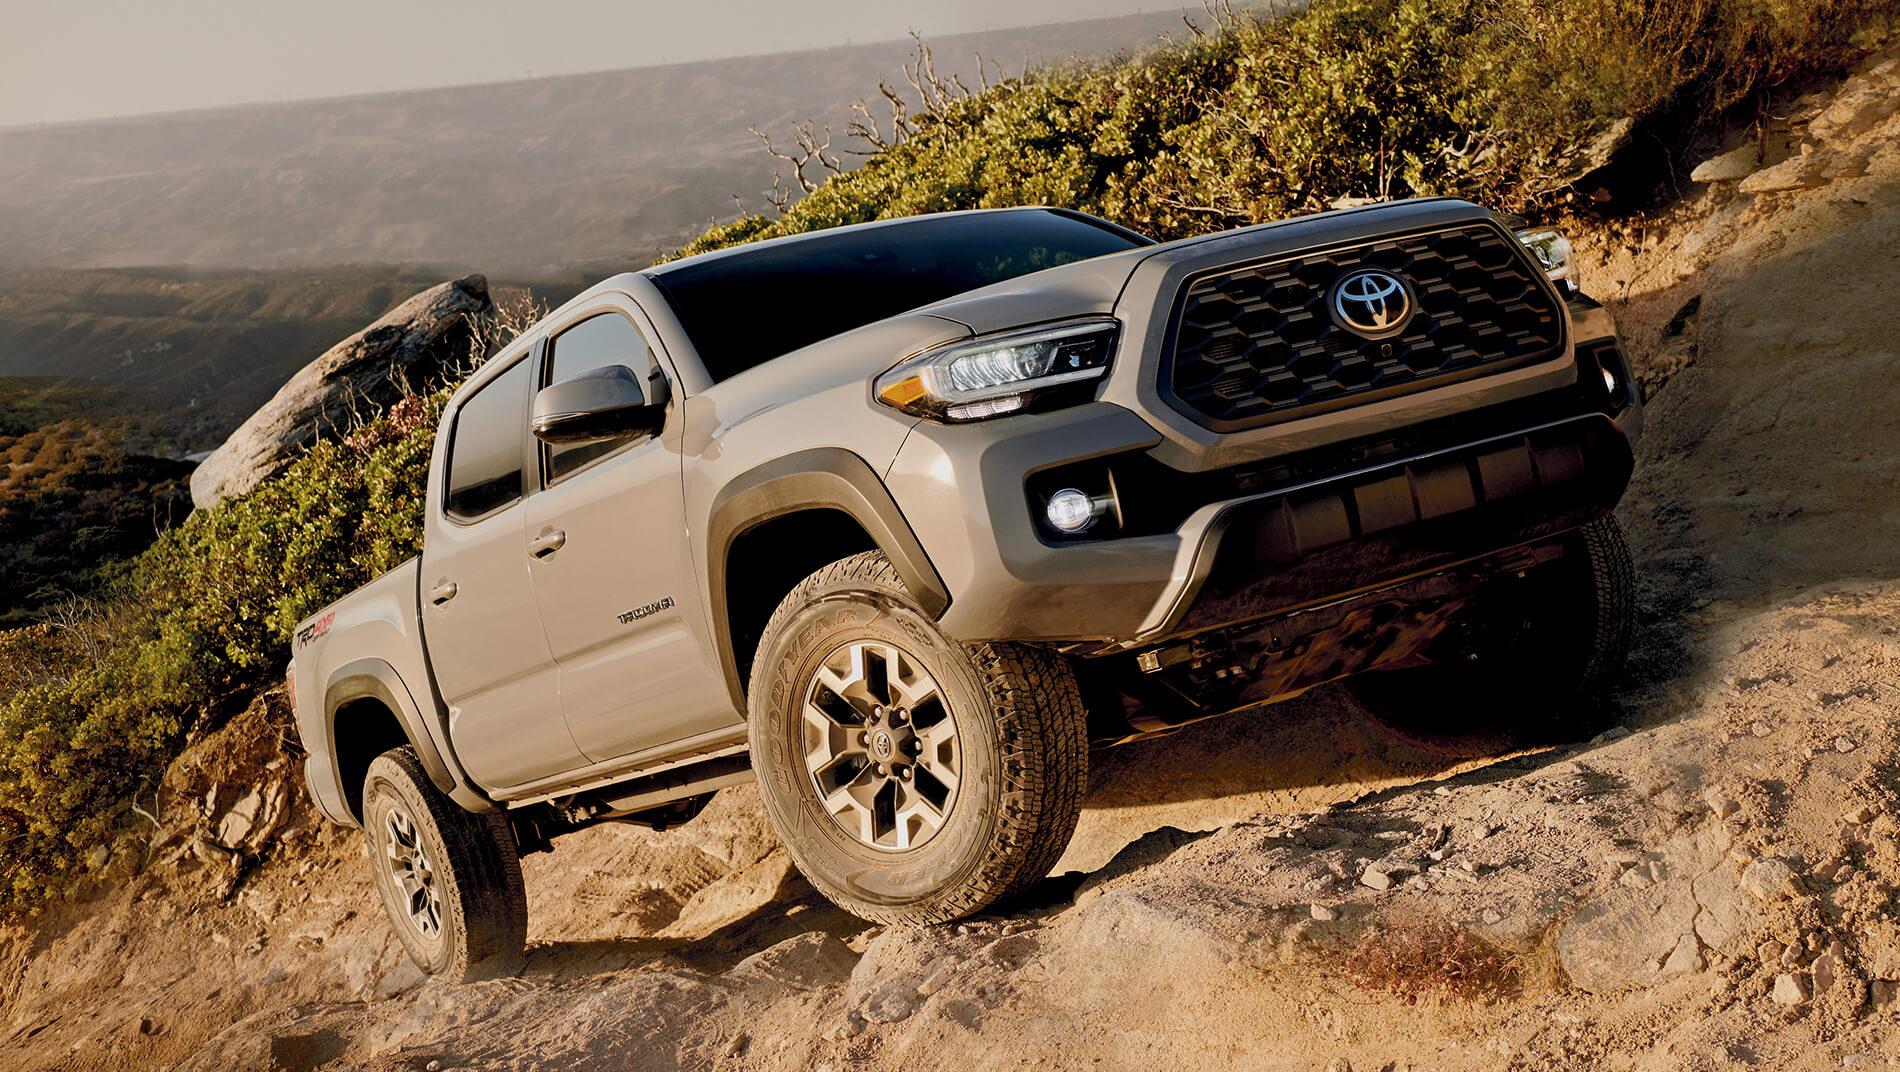 Toyota Tacoma climbing the side of a dusty mountain path